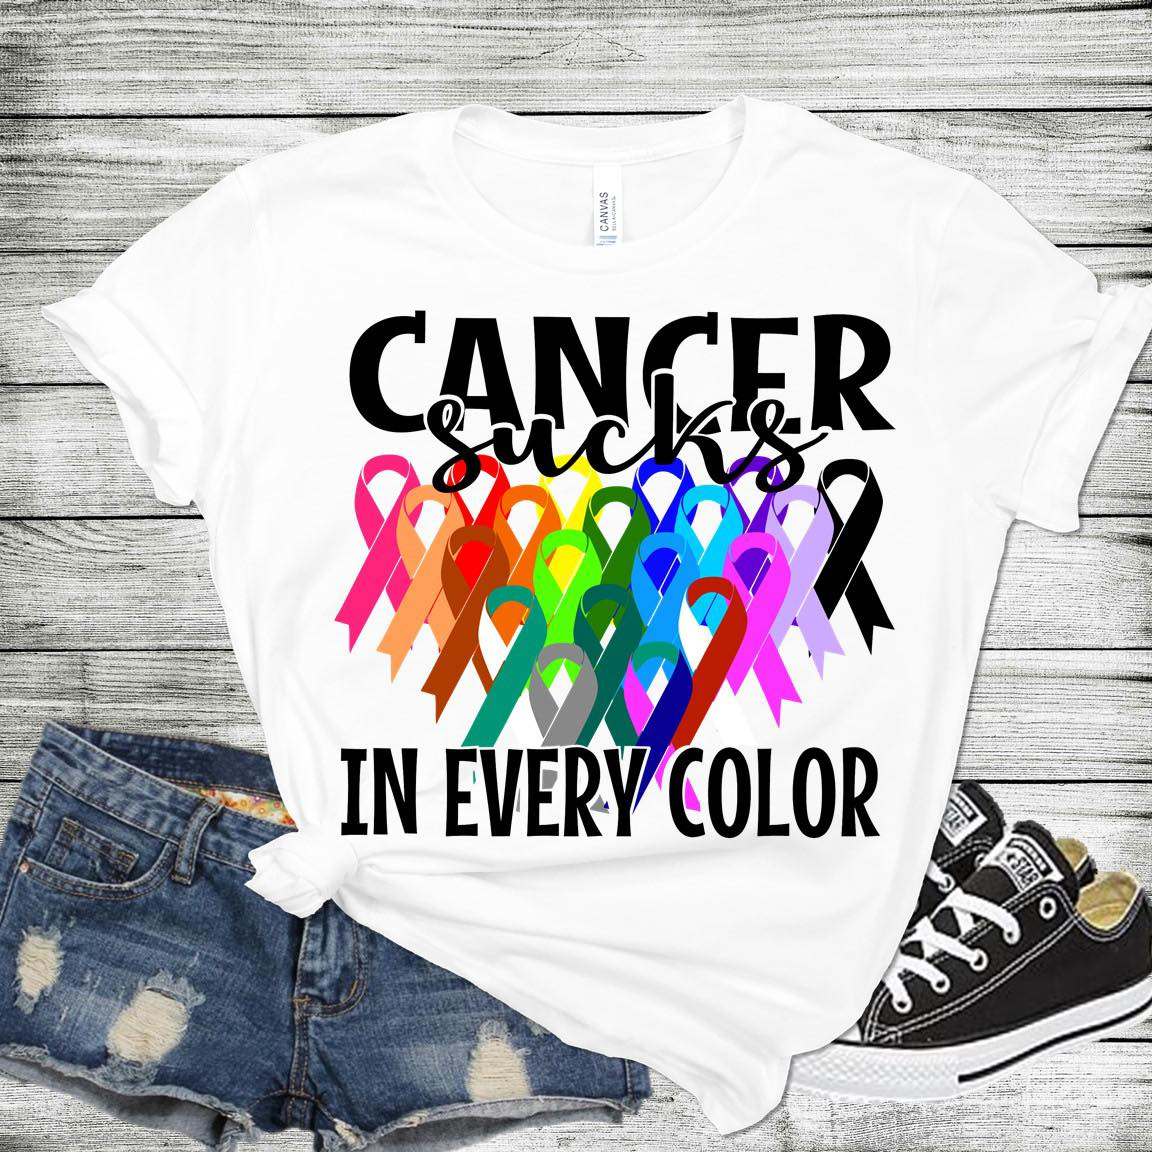 Cancer sucks in every color - Cancer awareness